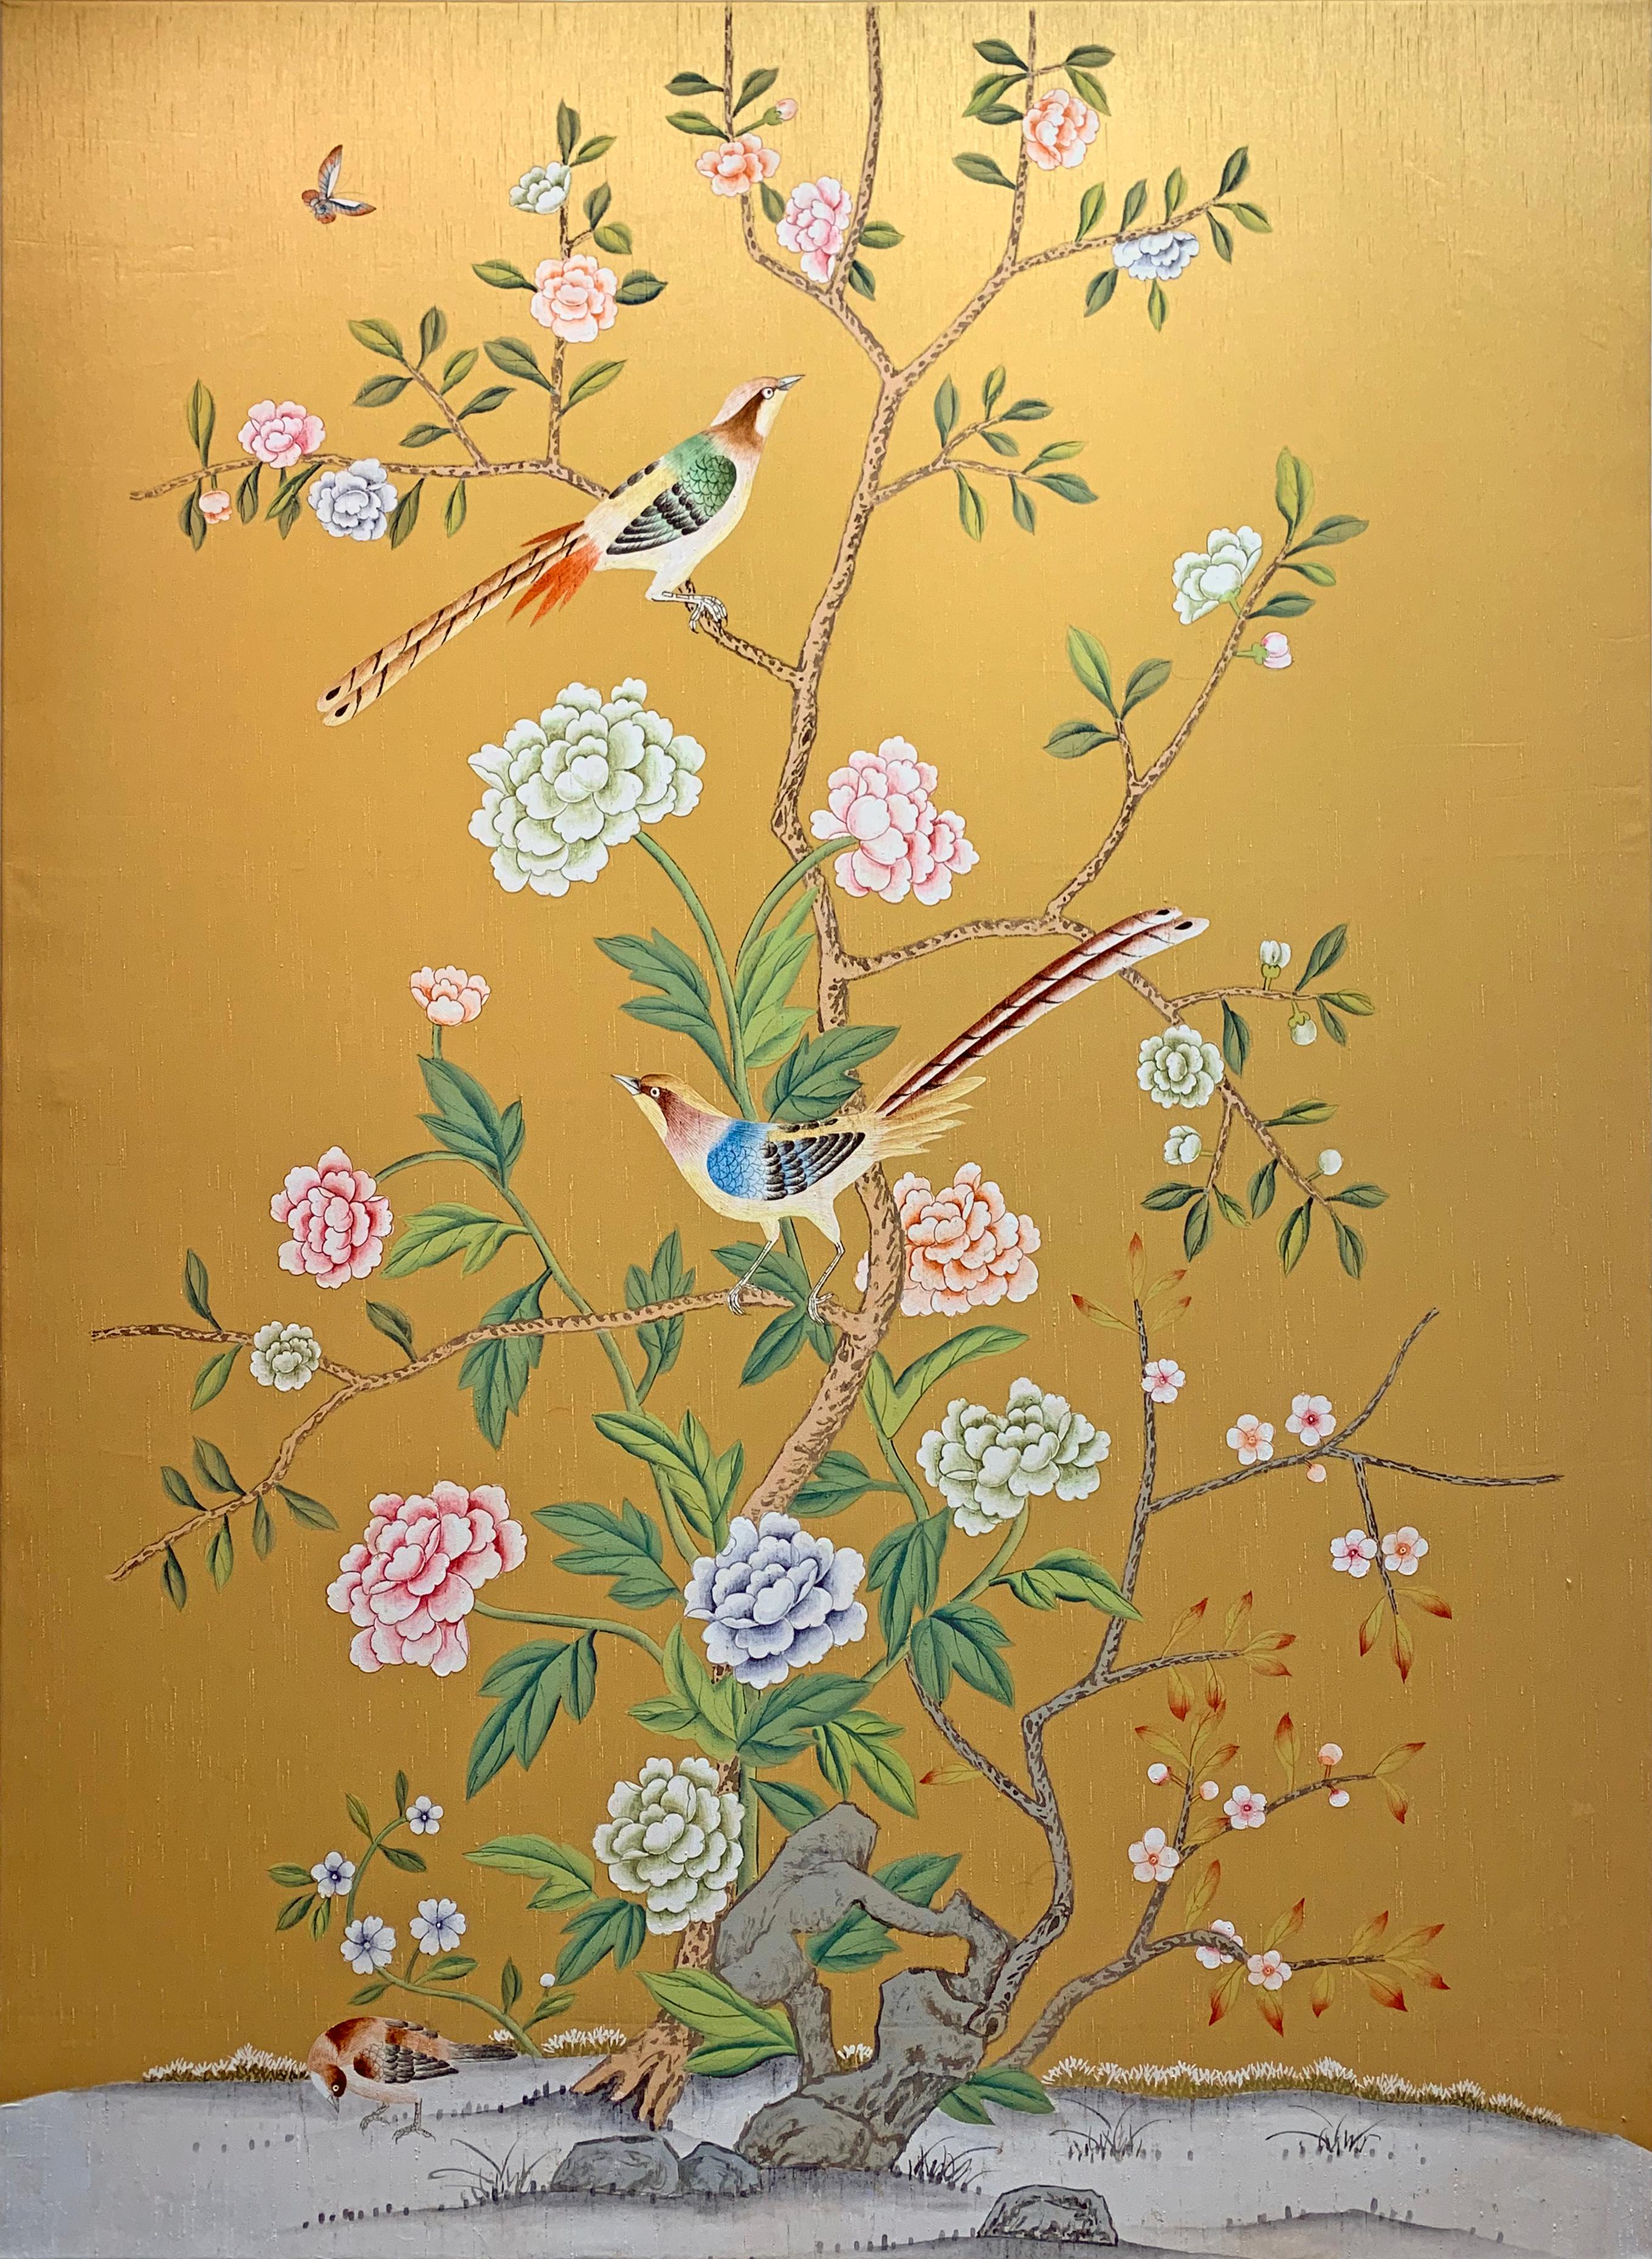 Sunlight & Birds is an original painting inspired by chinoiserie. Birds are sitting in the trees and flowers are blossoming around them.

Katharina Husslein has started a new body of work looking at rainforests and jungles. These beautiful parts of